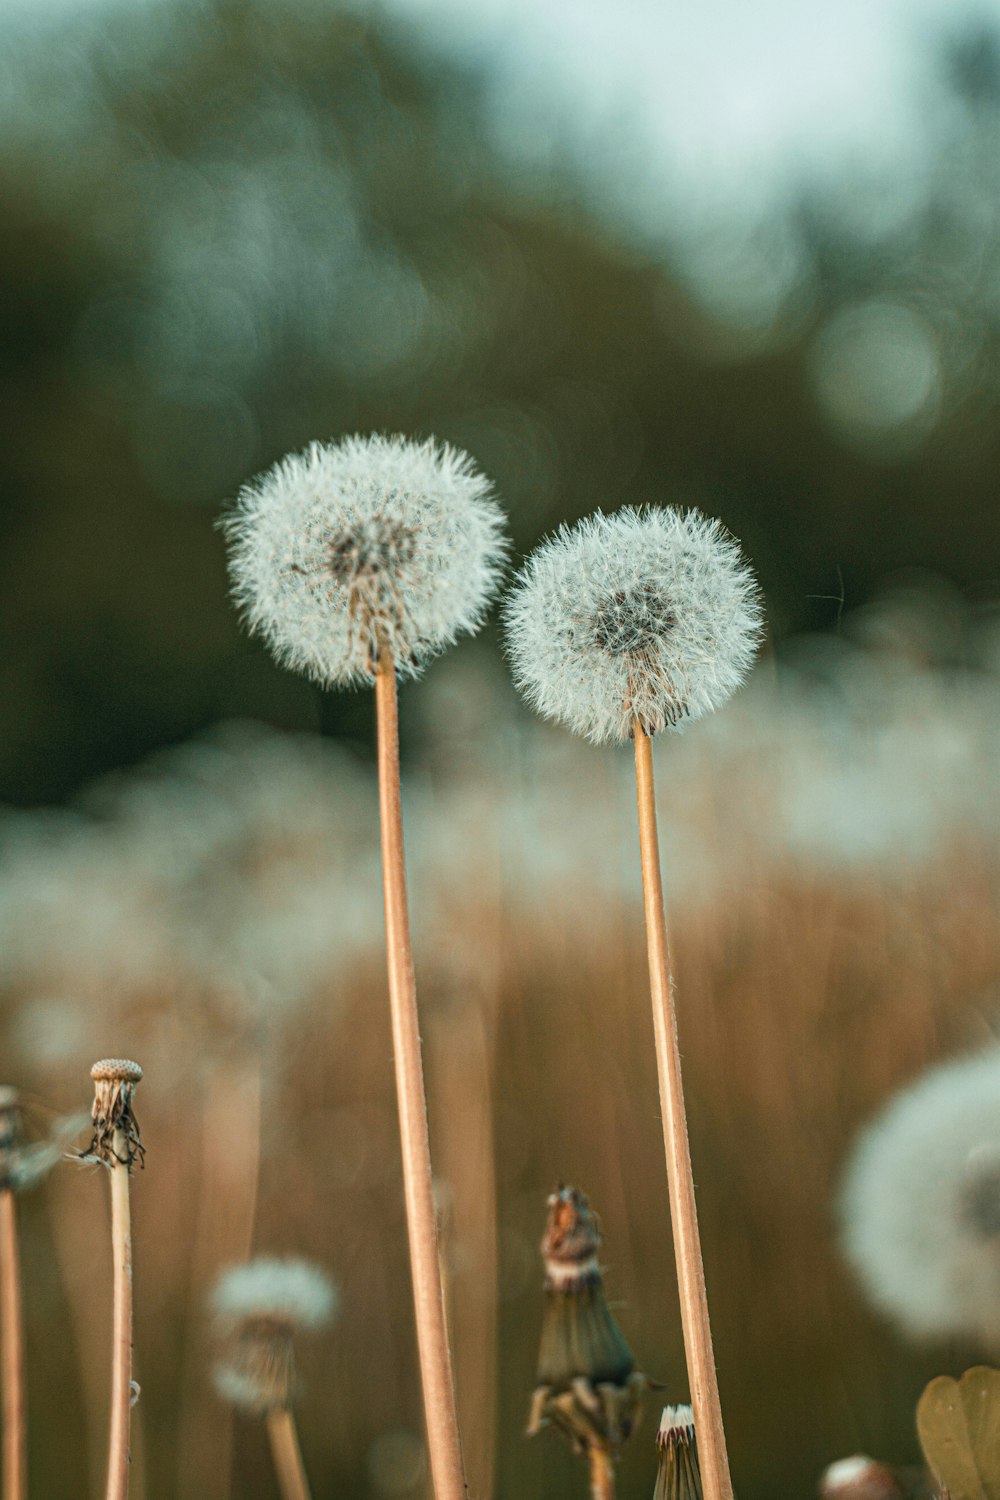 a group of dandelions blowing in the wind